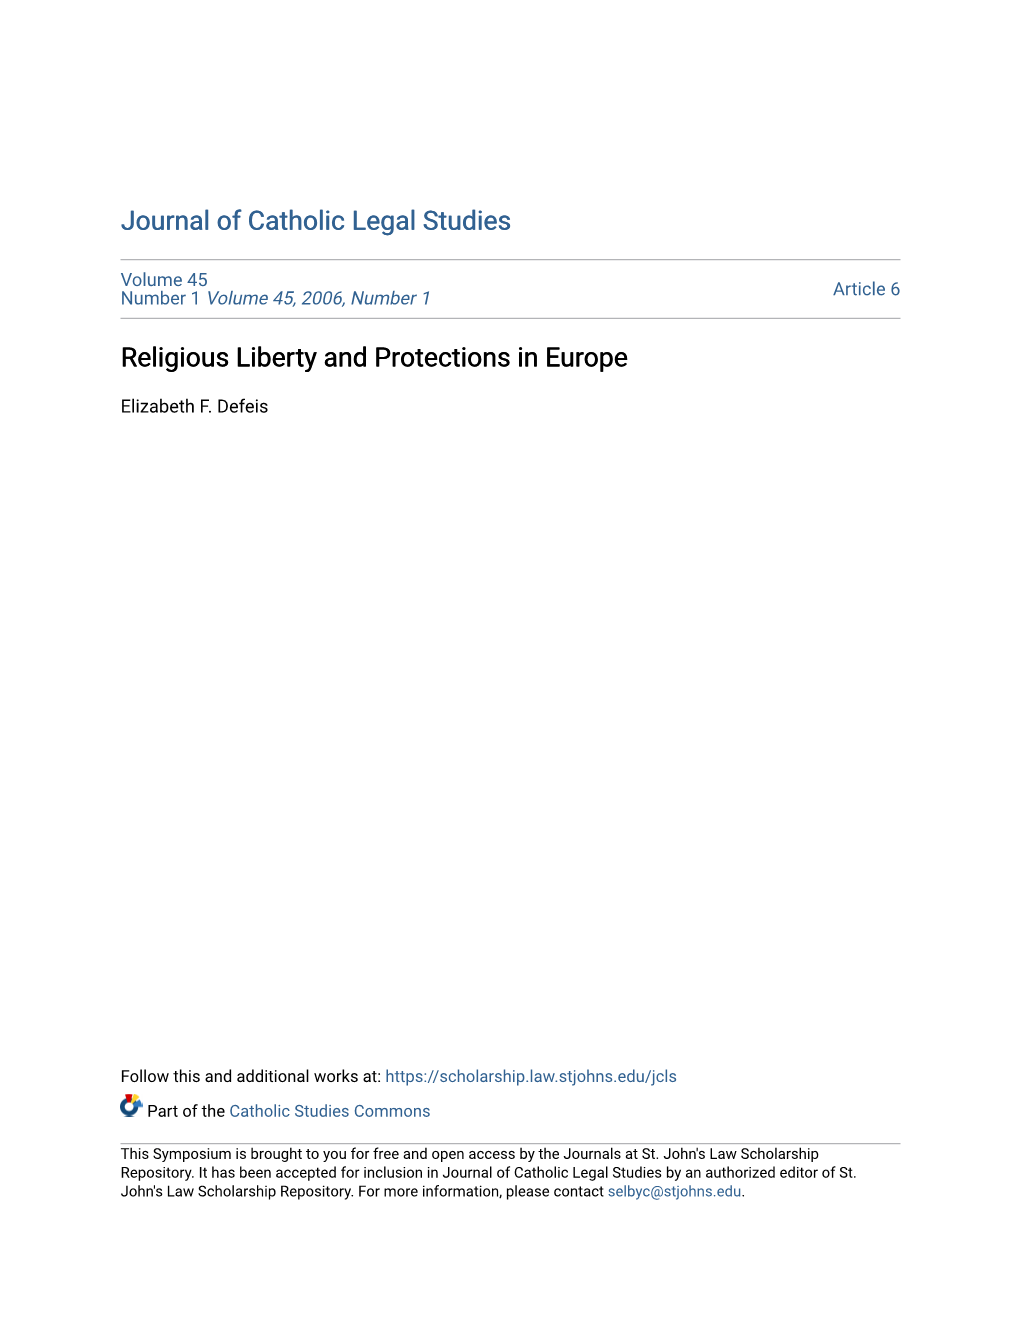 Religious Liberty and Protections in Europe